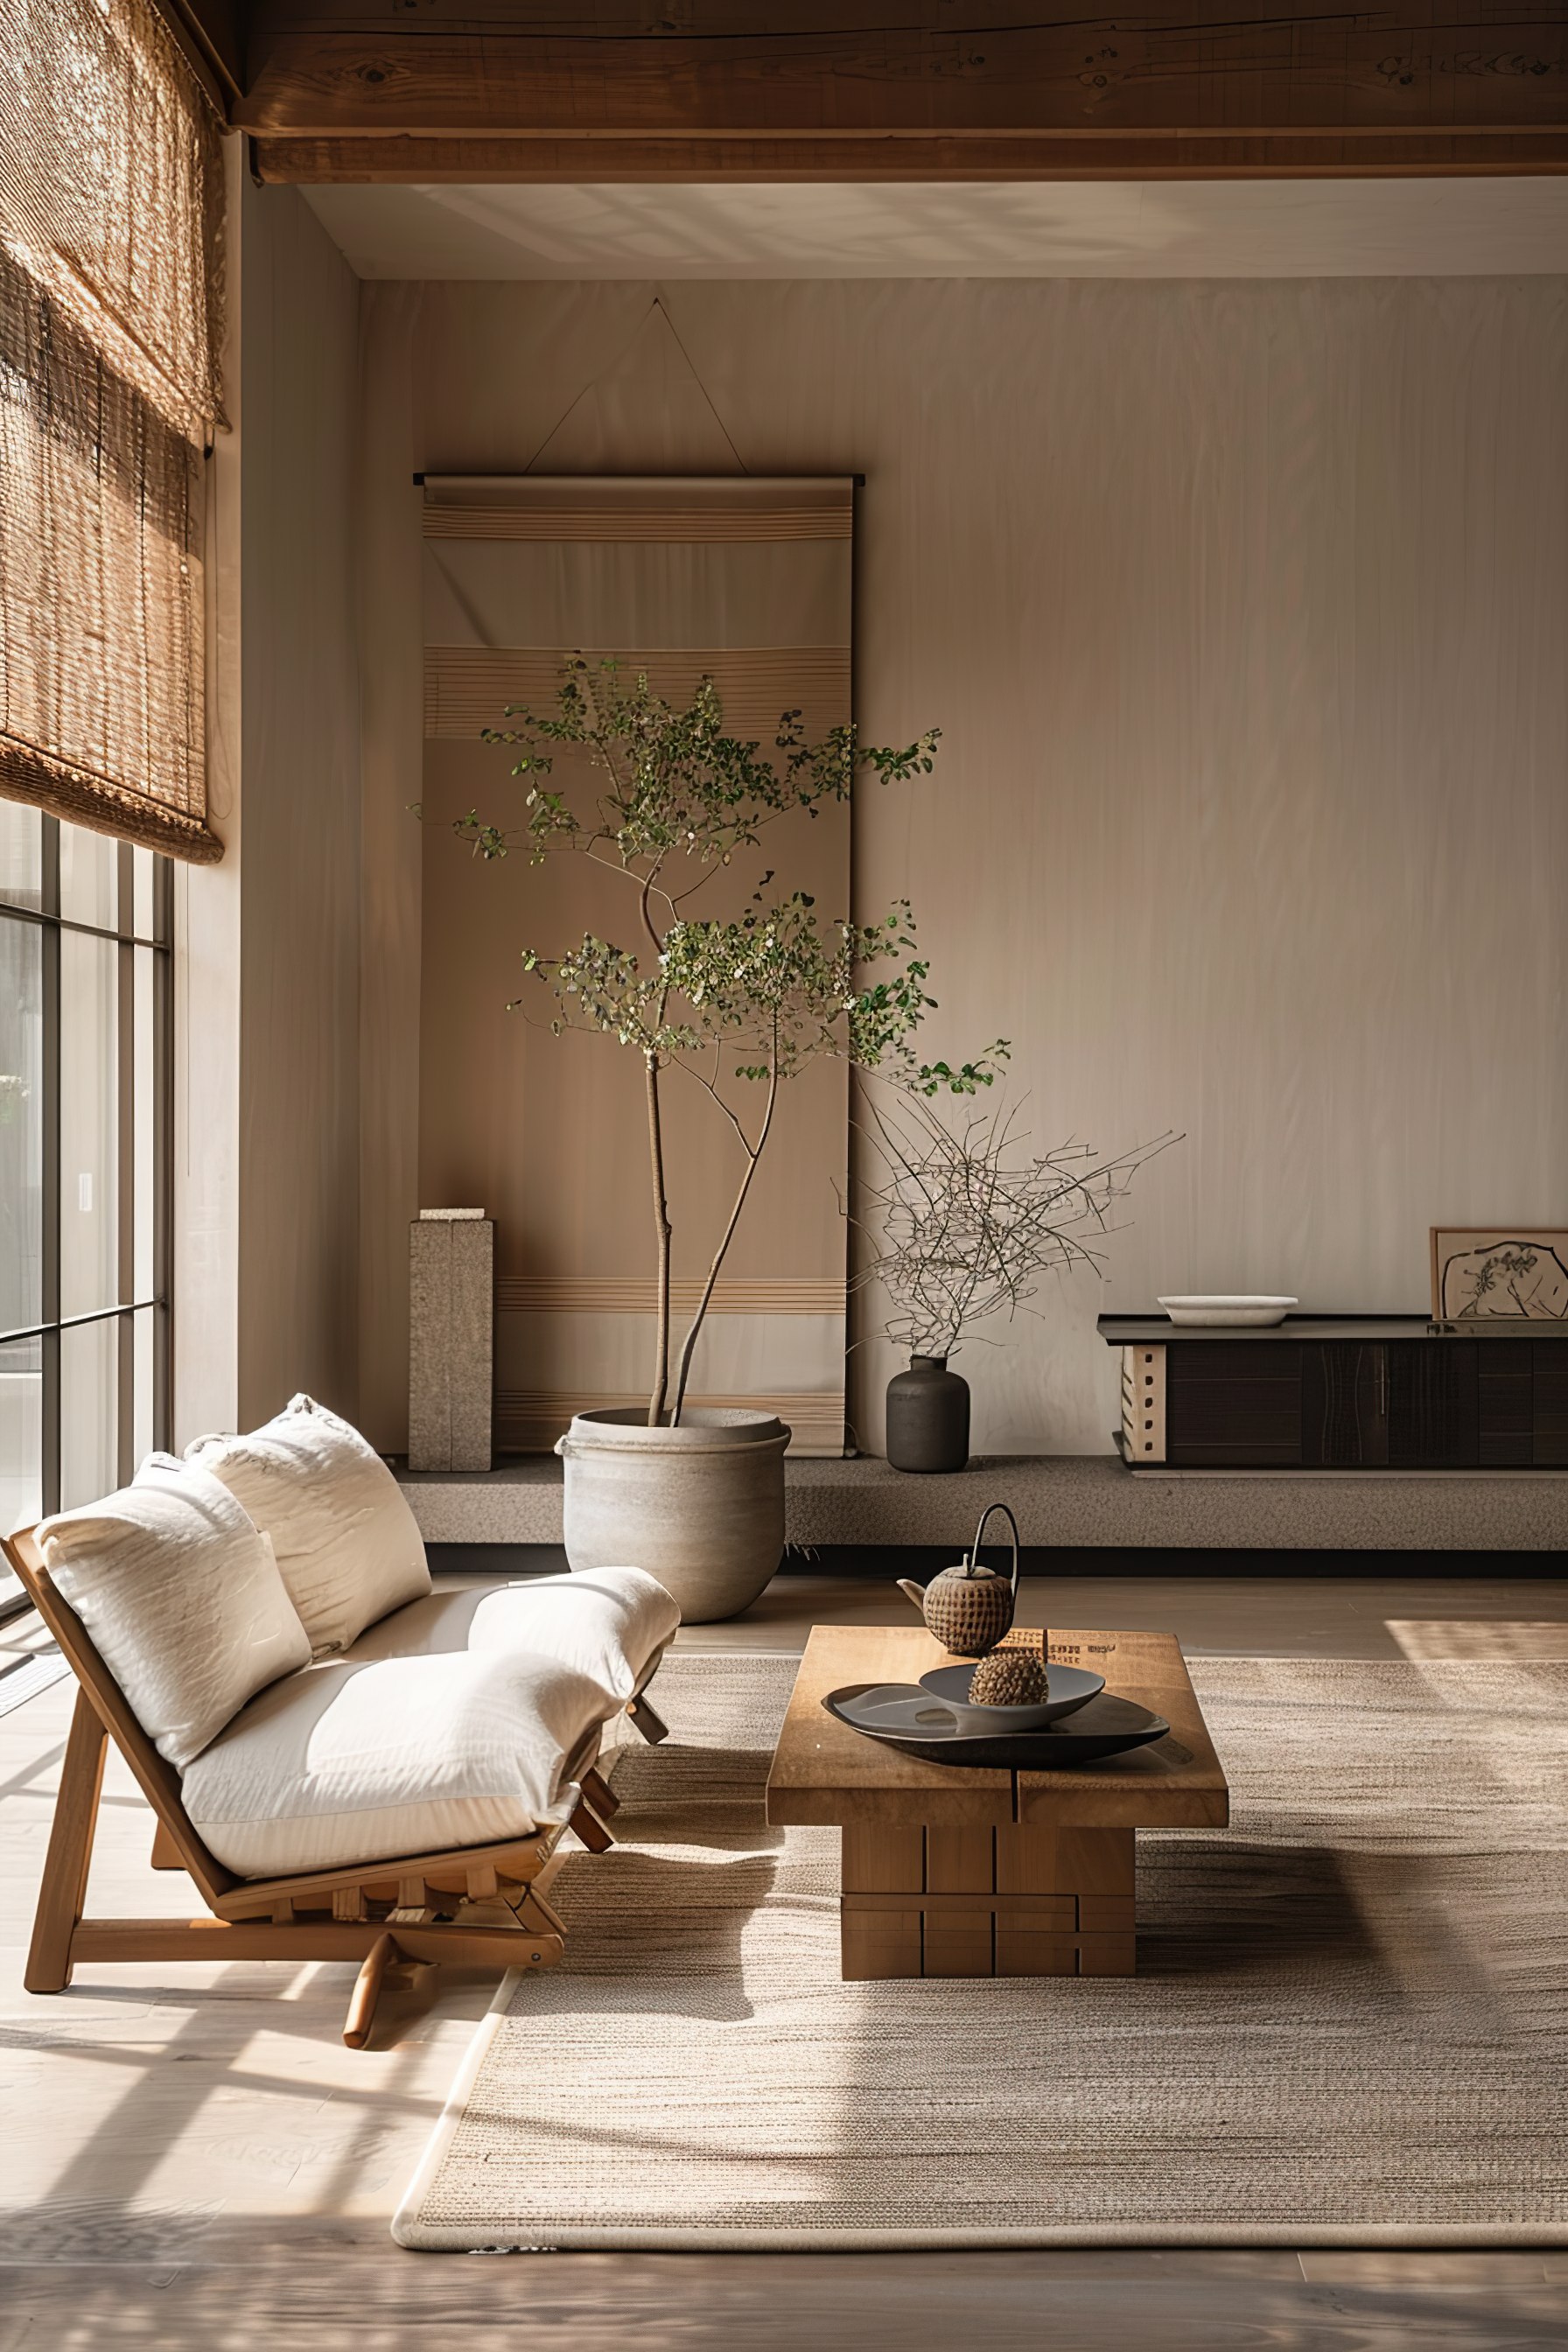 ALT: A cozy minimalist living room bathed in natural light, featuring a wood lounge chair, potted plants, and earth-tone decor.